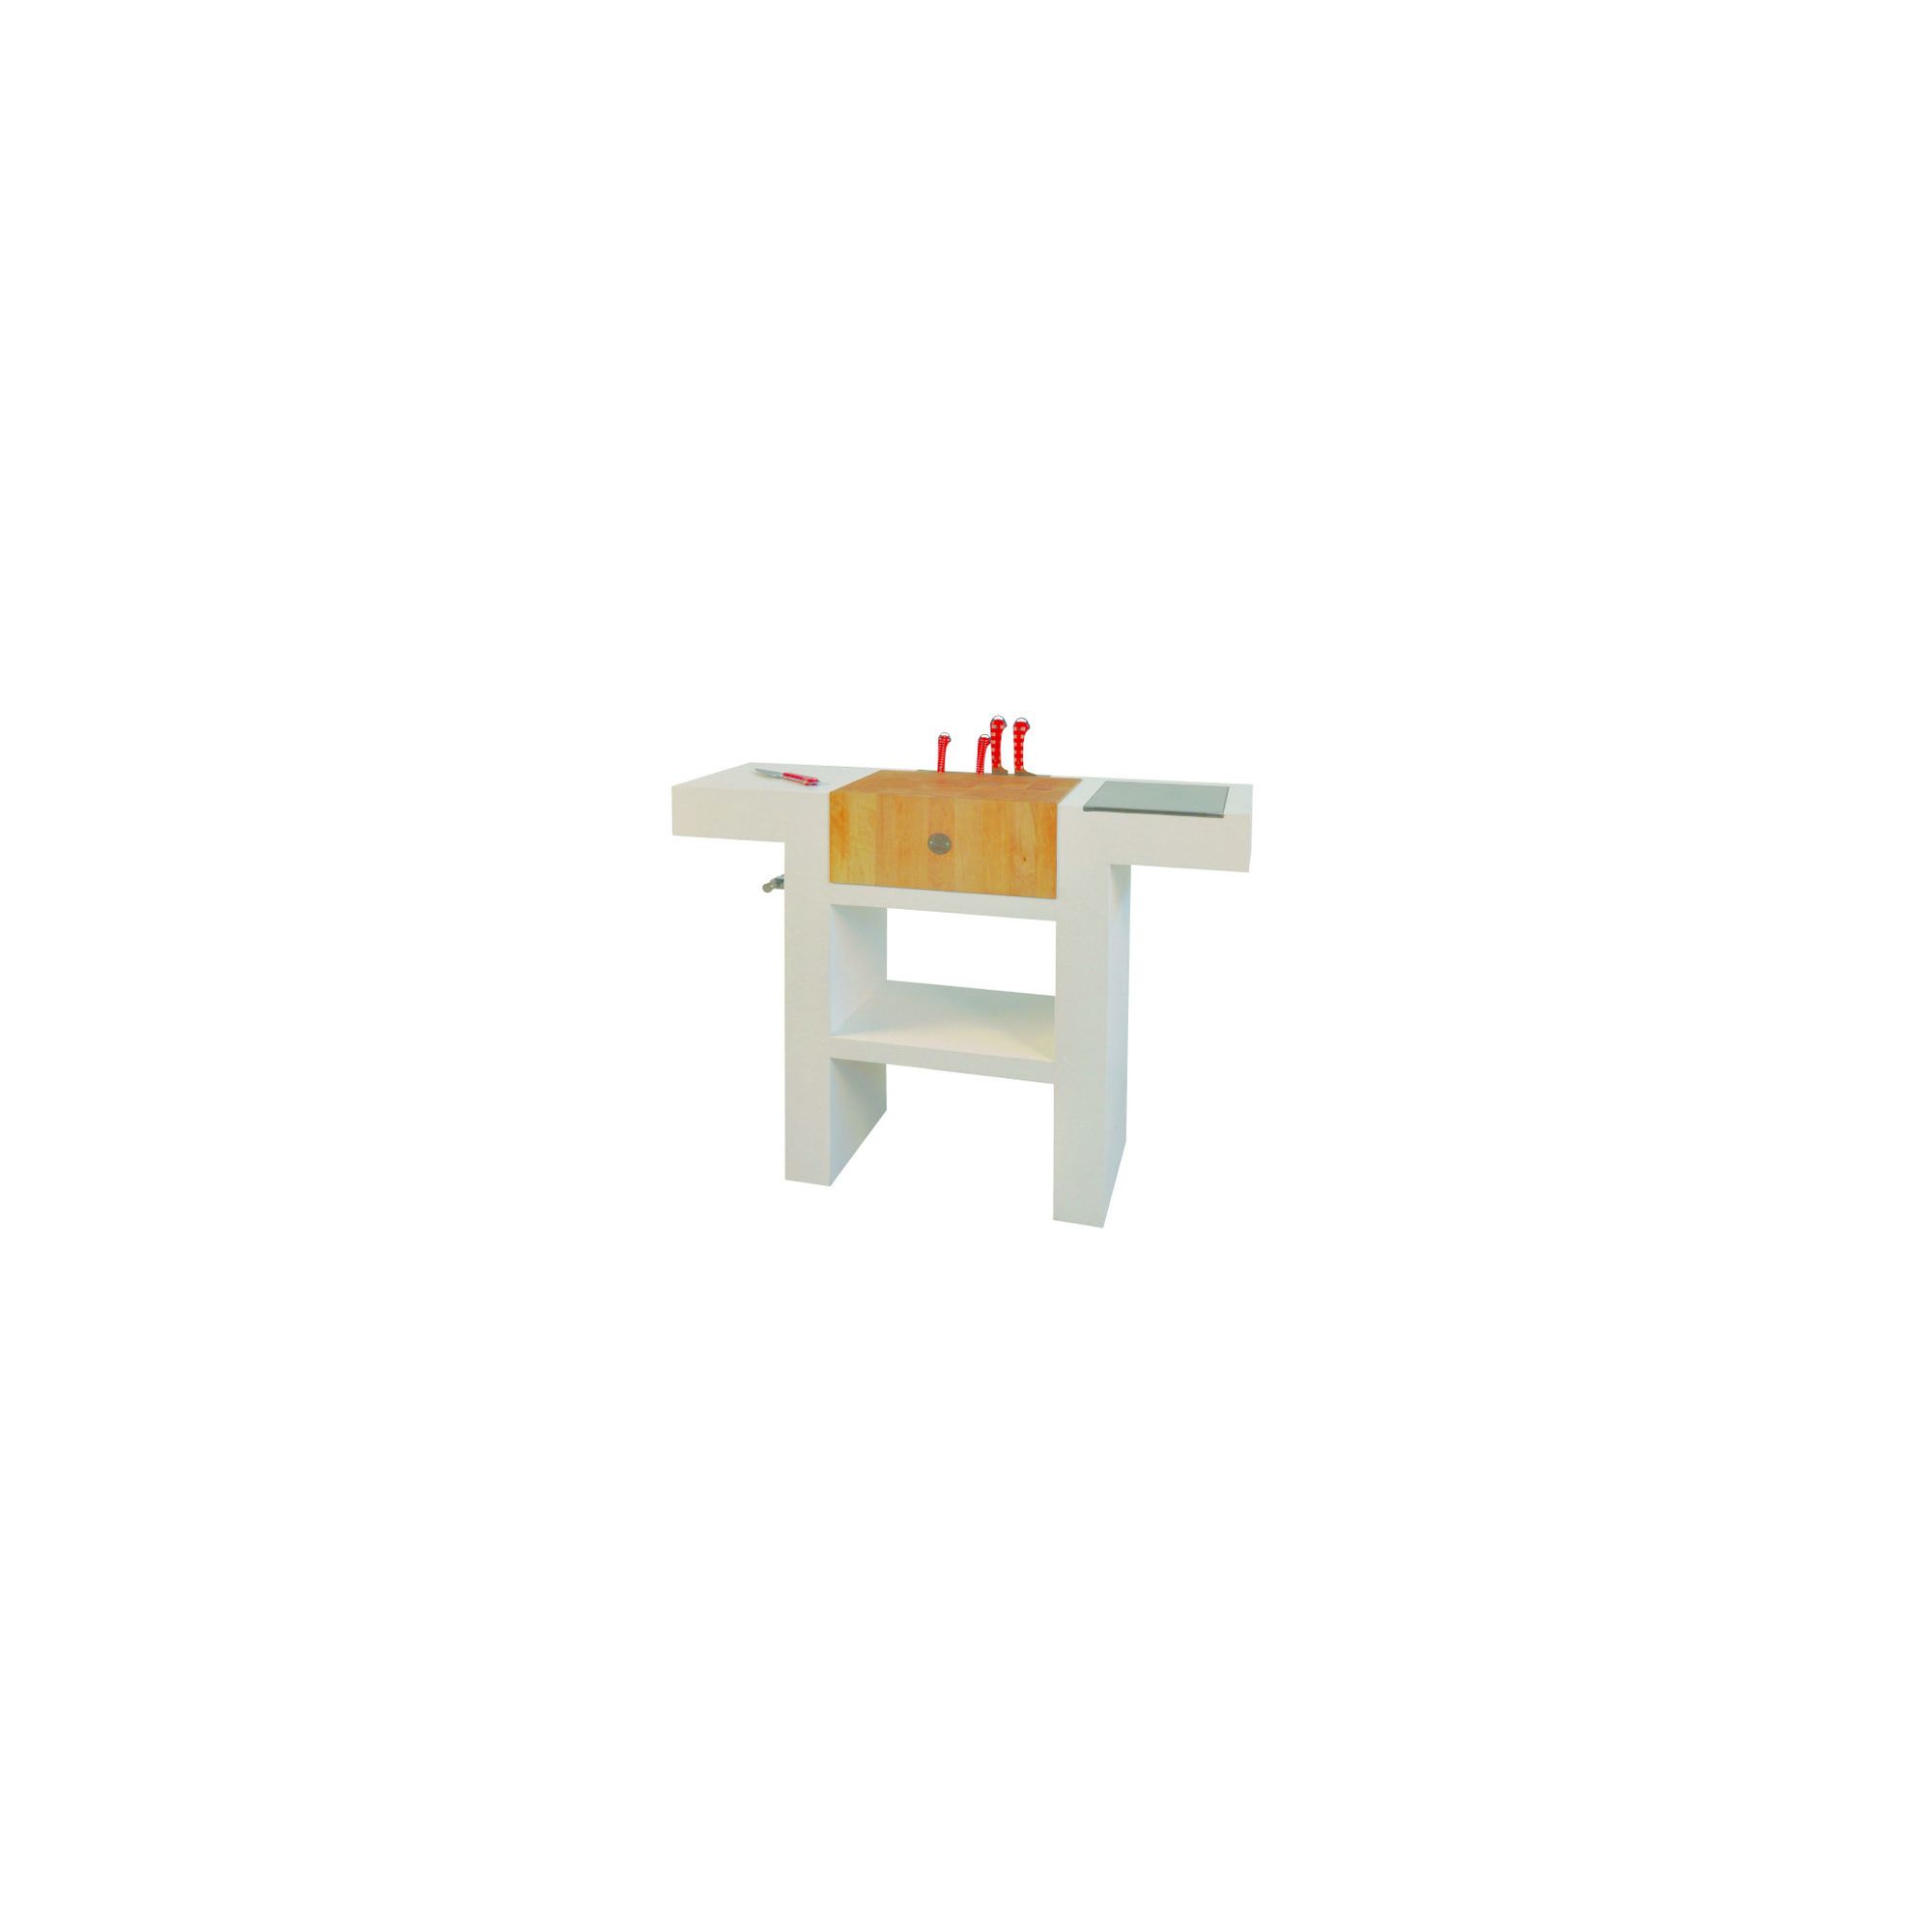 Chabret Console Block by MC Berger - 90cm X 120cm X 40cm at Tesco Direct